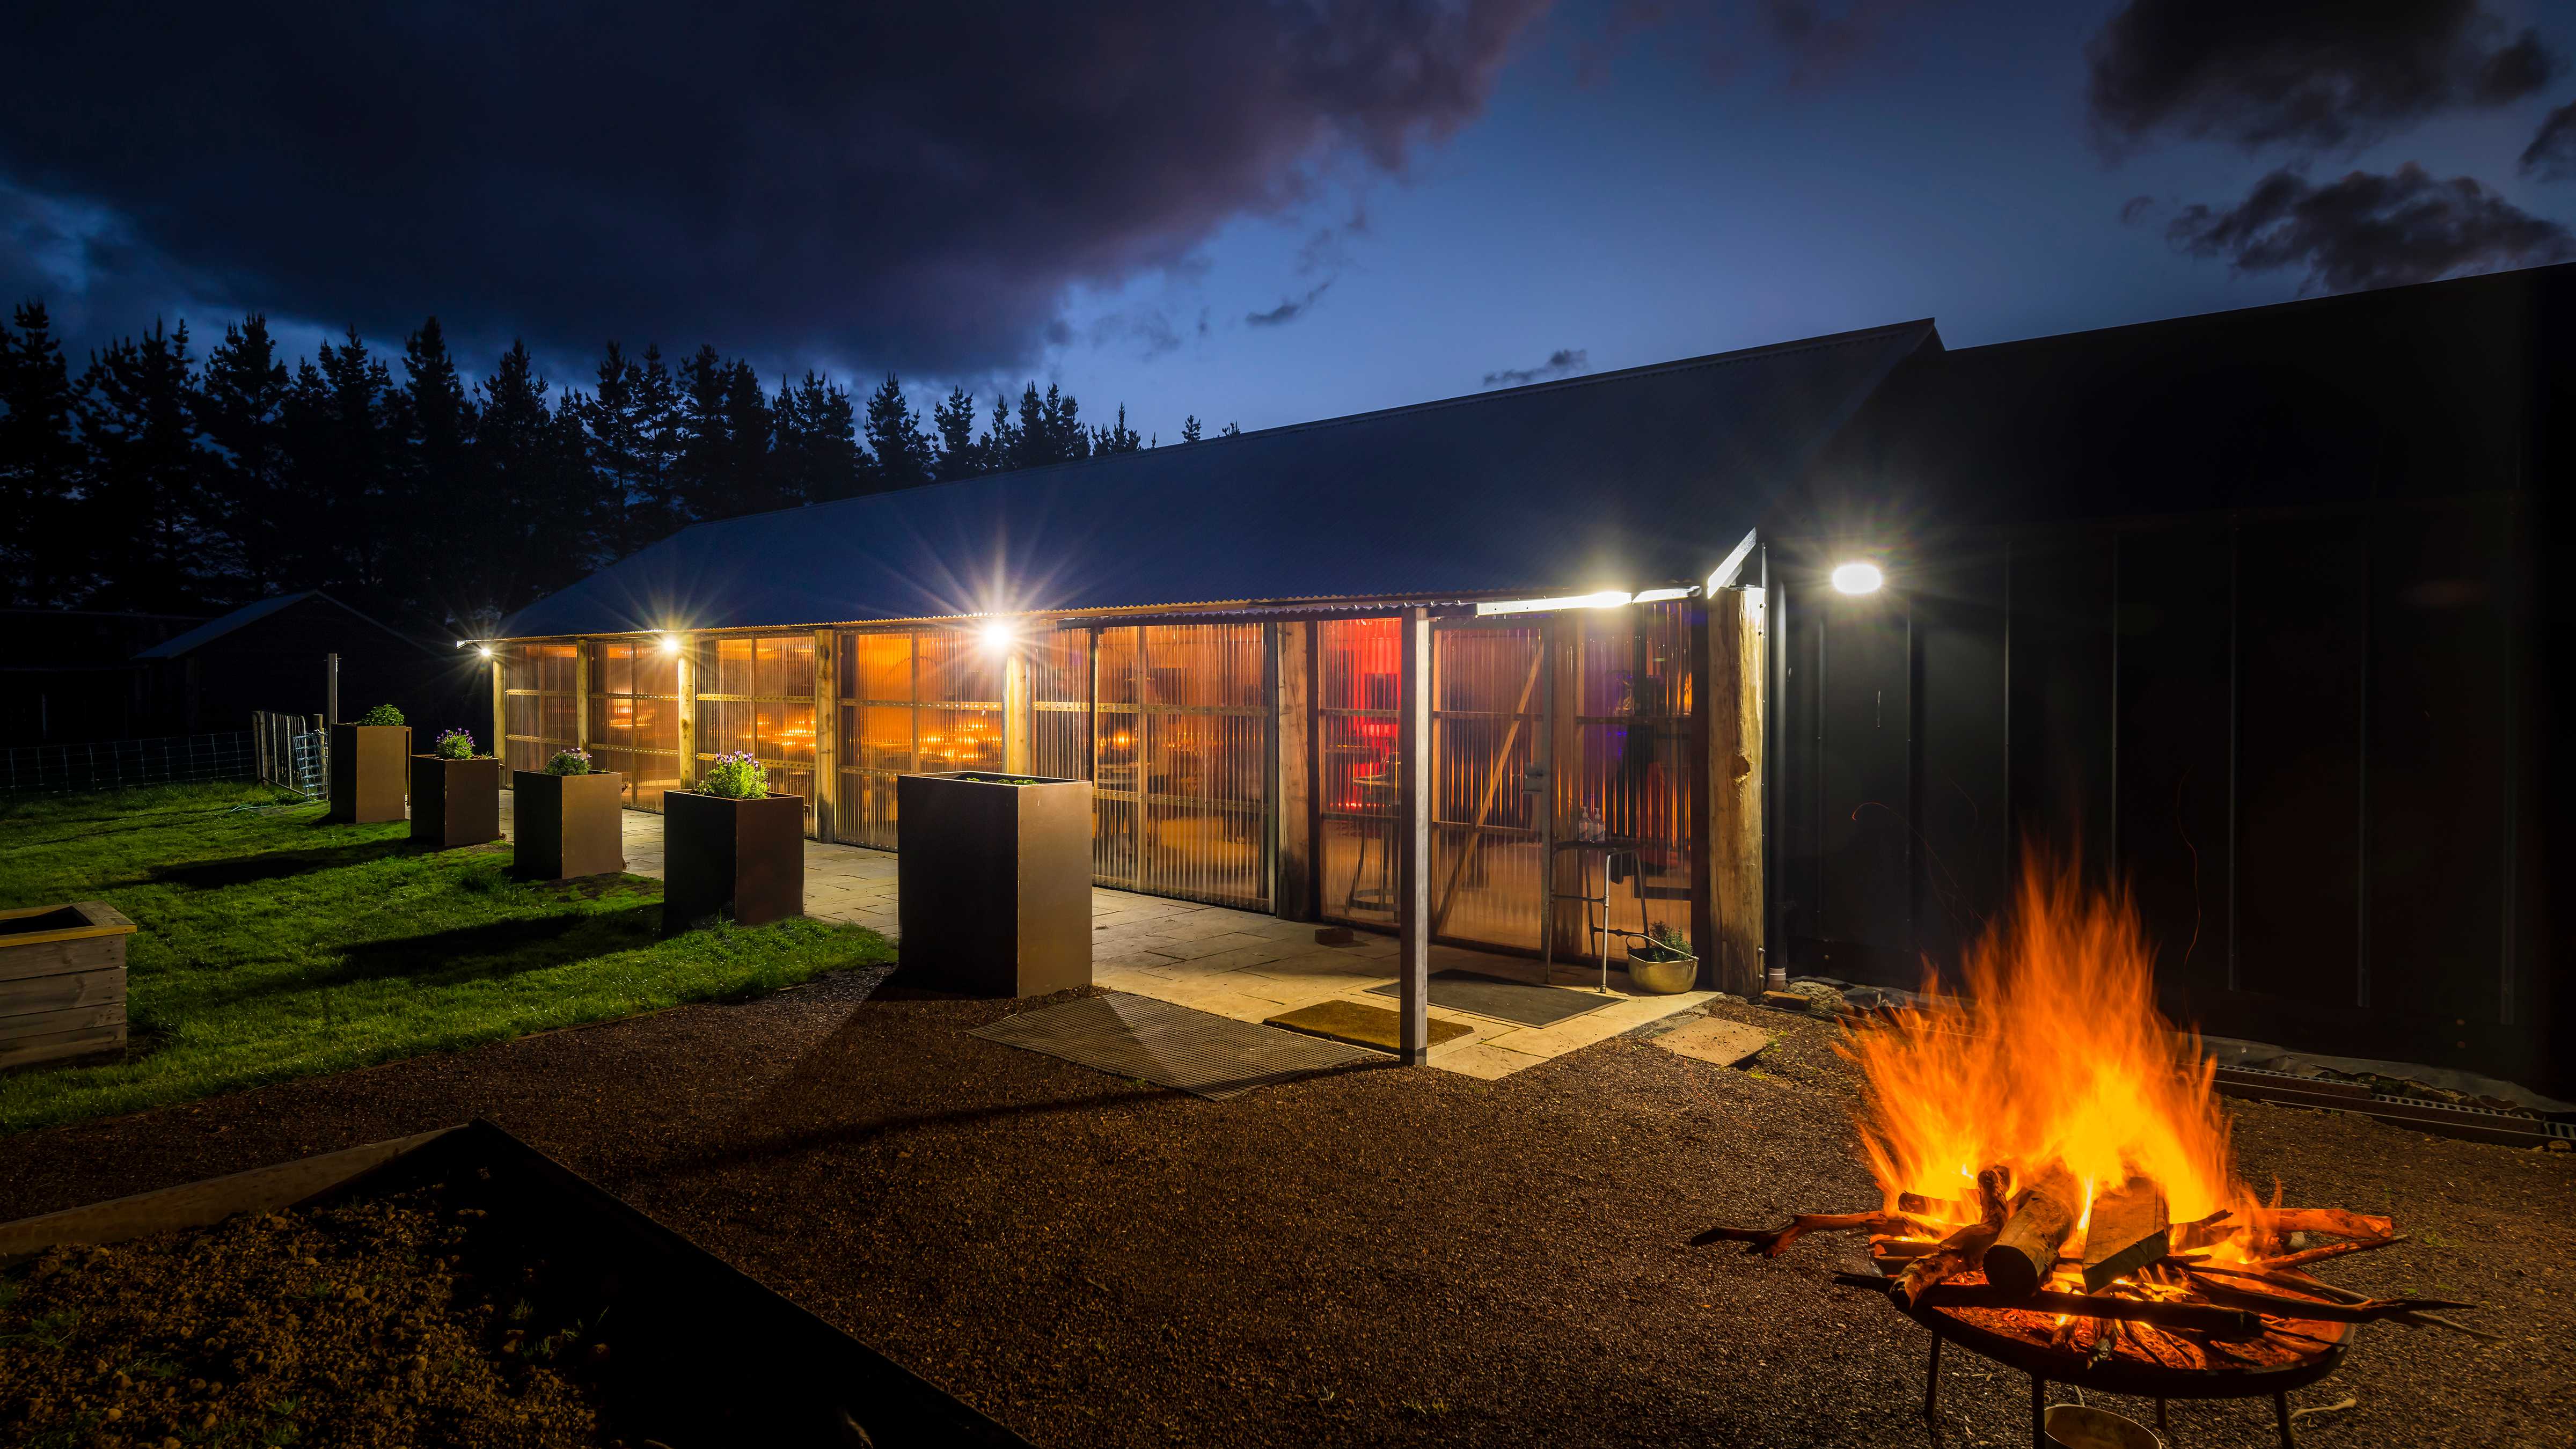 An exterior night time view of the Archery with a lit fire pot in front. The side of the building is clear laserlight and the lights are on inside. There is grass and gravel in front of the building and the darkened sky behind. Photo: Rob Burnett.